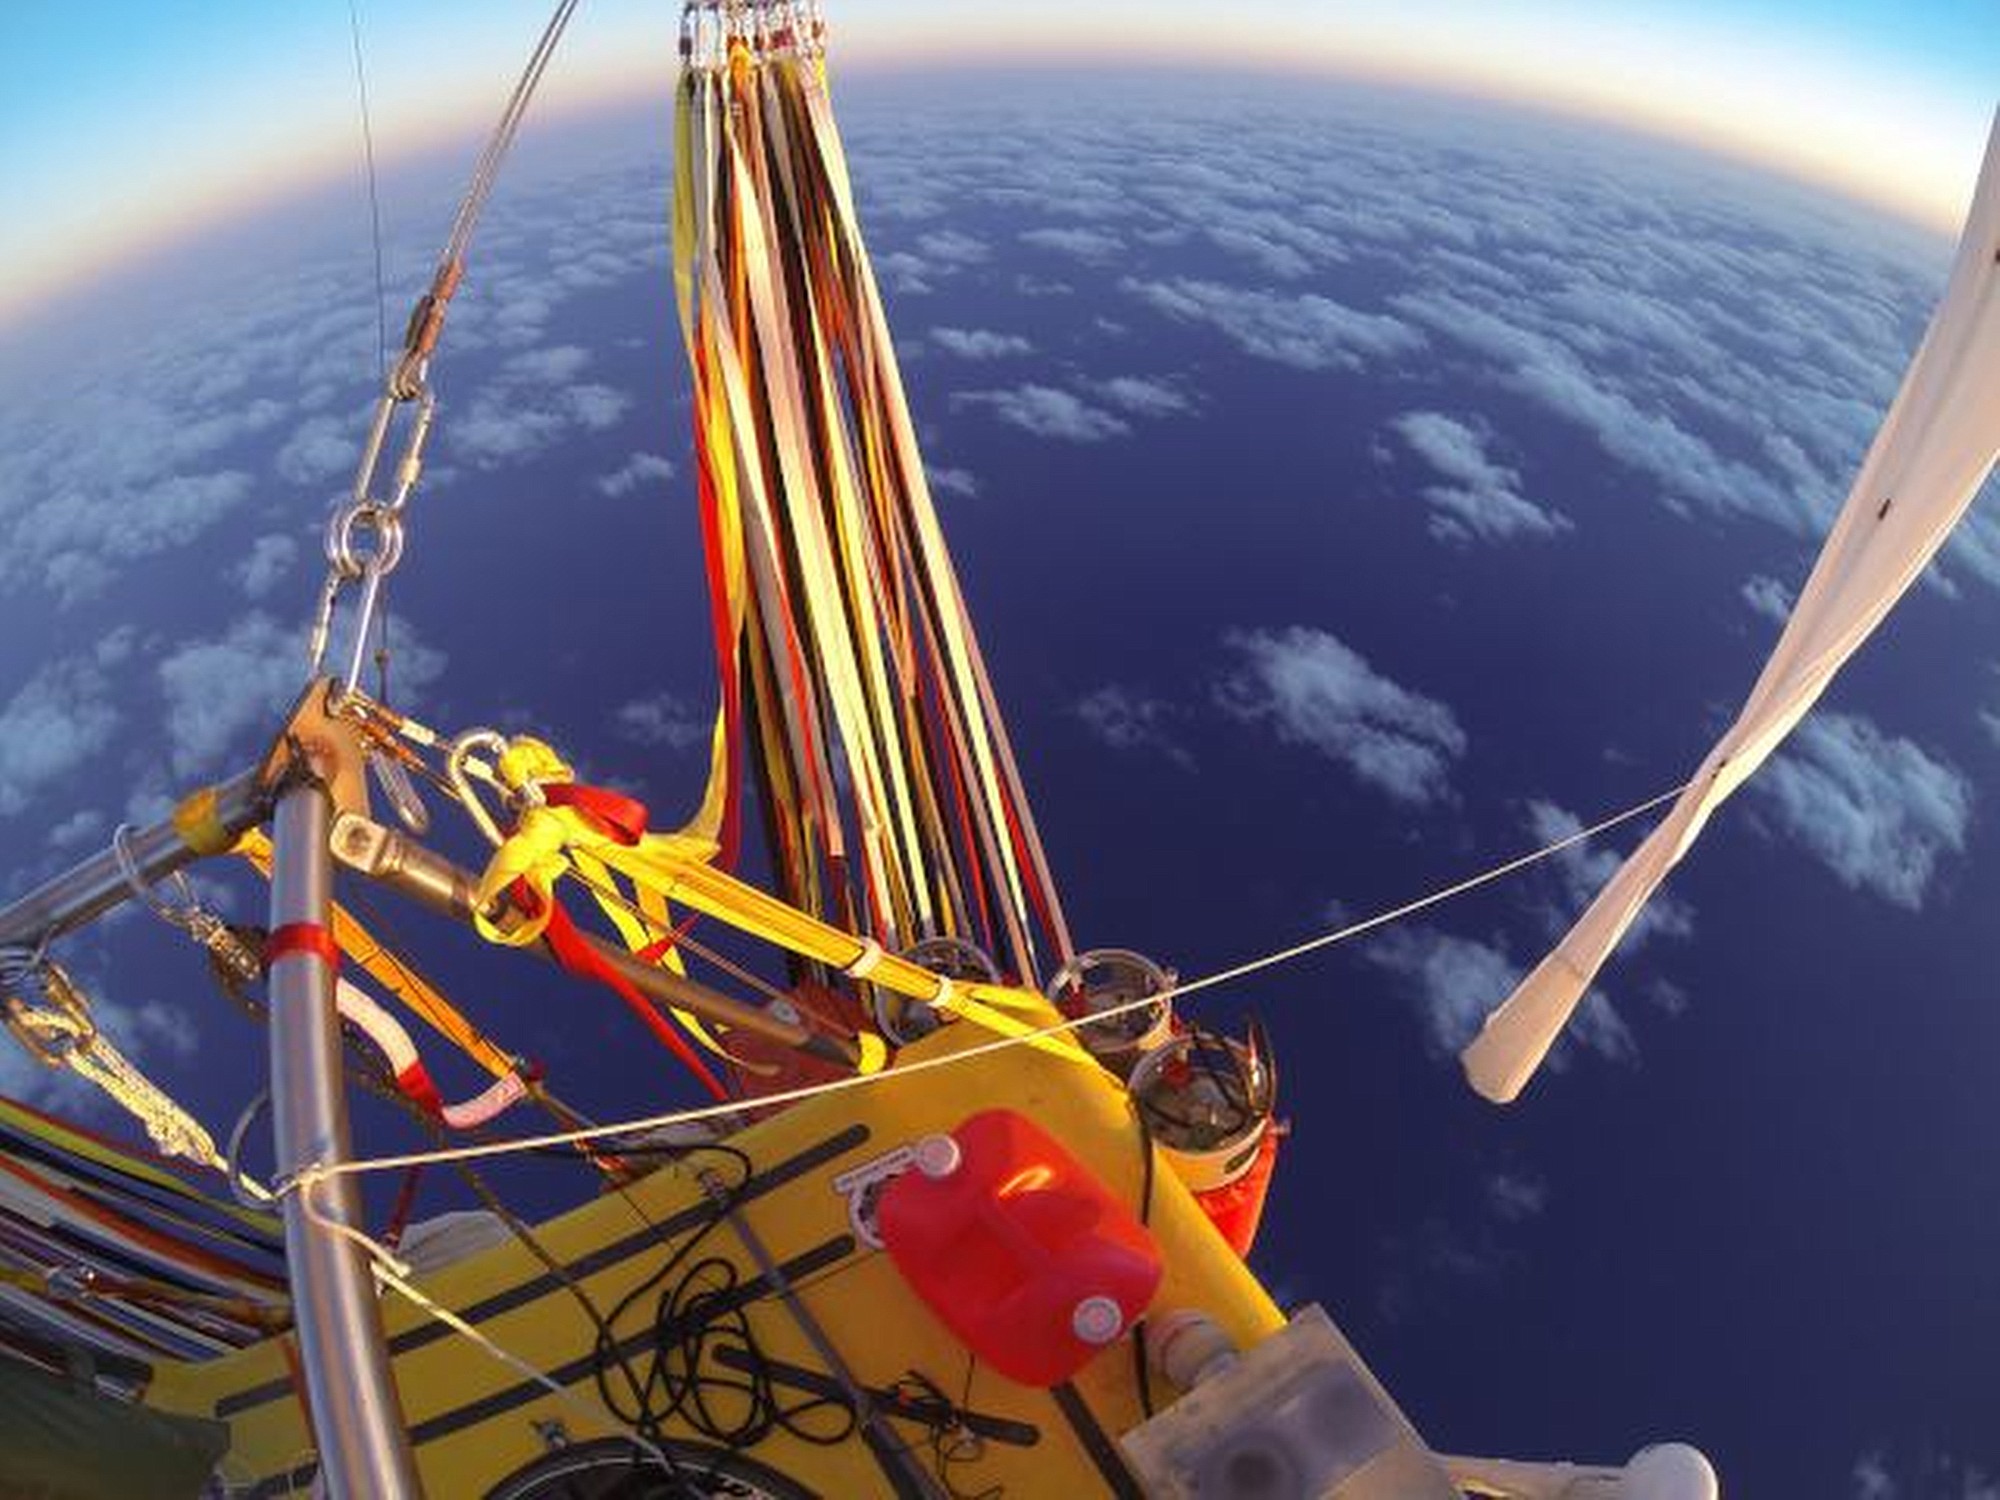 The Two Eagles Balloon Team -- Troy Bradley of New Mexico and Leonid Tiukhtyaev of Russia -- set off from Saga, Japan, on Jan. 25 in their quest to pilot their helium-filled balloon from Japan in a bid to reach North America and break two major records en route. They passed the duration record Friday.